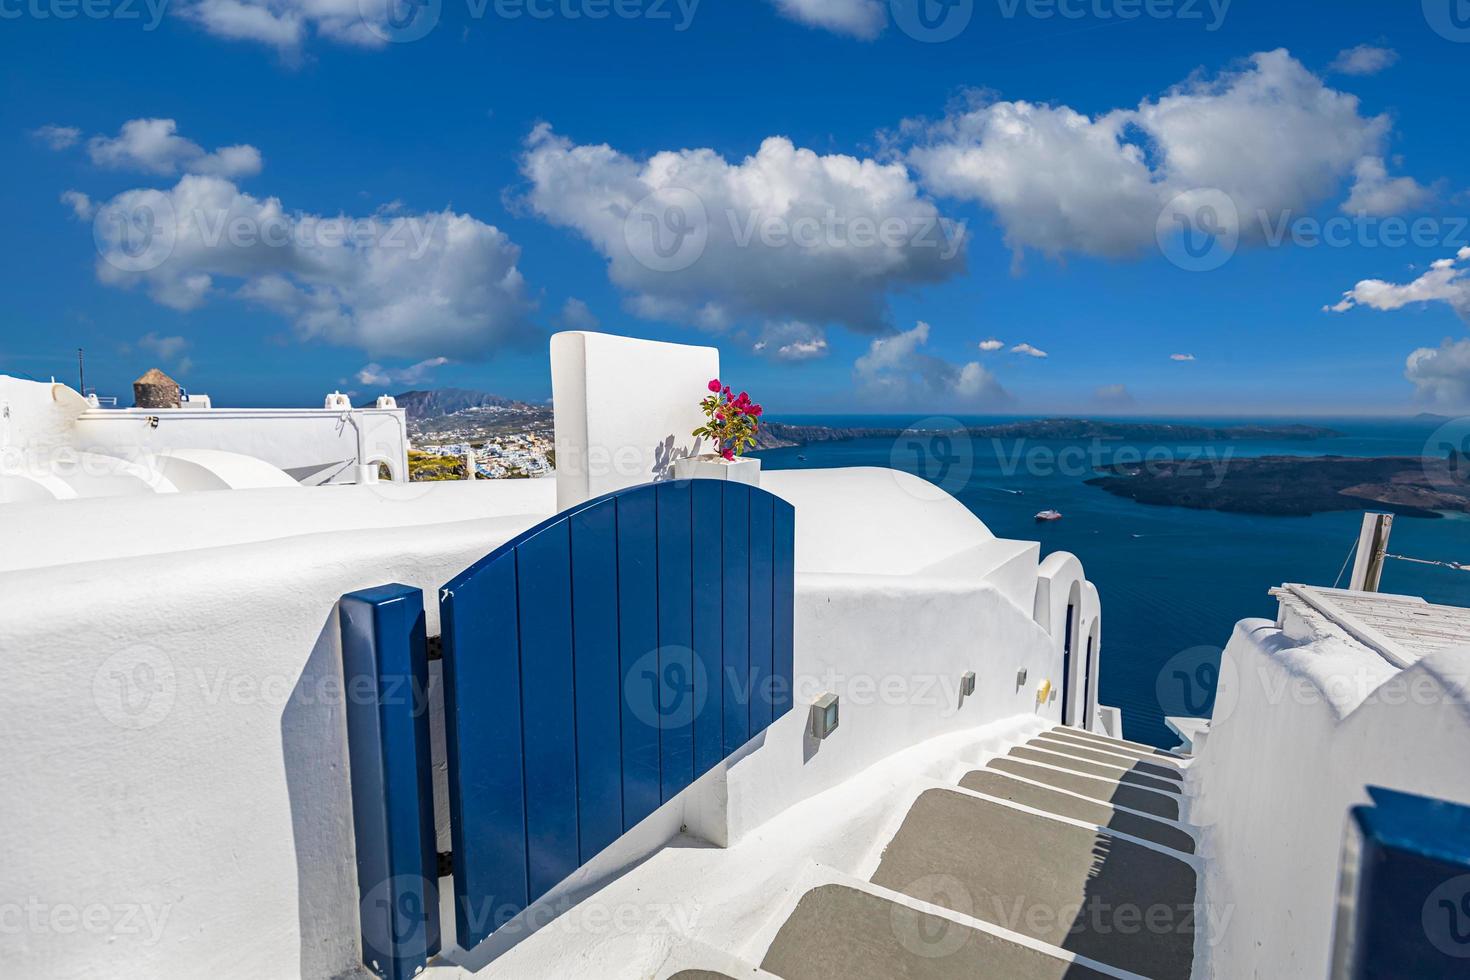 Relaxing romantic view white architecture Santorini Greece, caldera view over blue sea volcano island. Summer landscape for travelling vacation template. Luxury resort hotel, famous travel destination photo